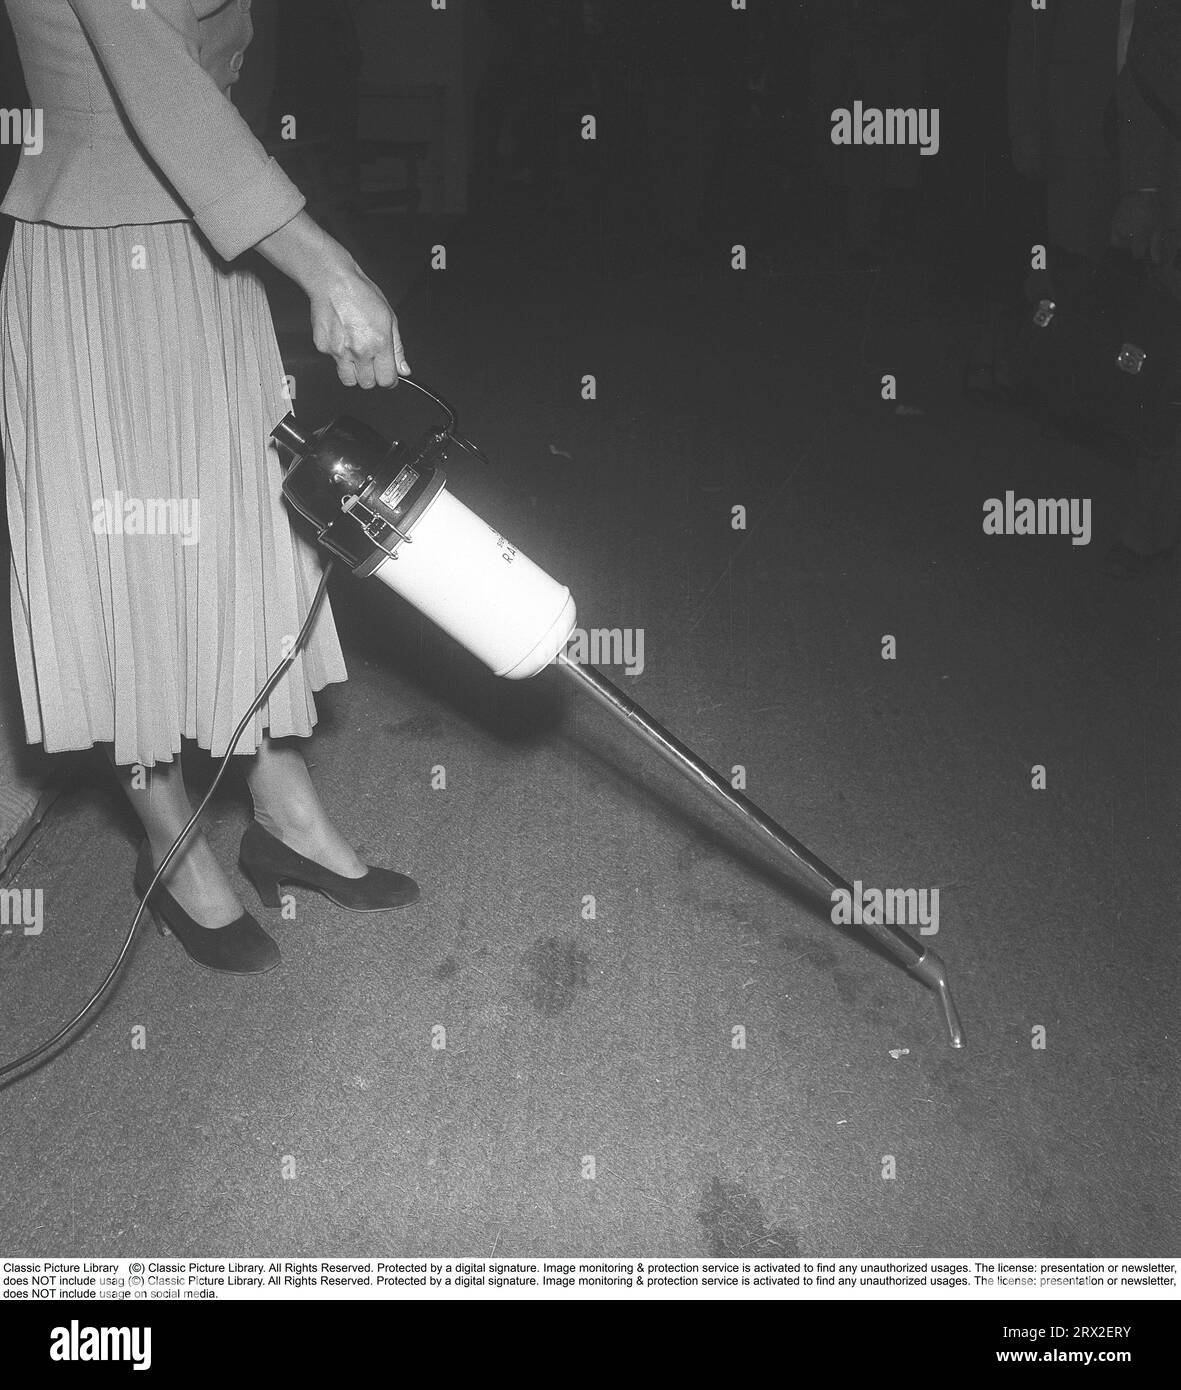 Vacuuming in the 1950s. A woman demonstrates the new vacuum cleaner from Siemens. Light and portable, the product was of the time, not unlike the appearance of today's cordless versions of vacuum cleaners. Sweden 1950. Kristoffersson ref BA61-6 Stock Photo